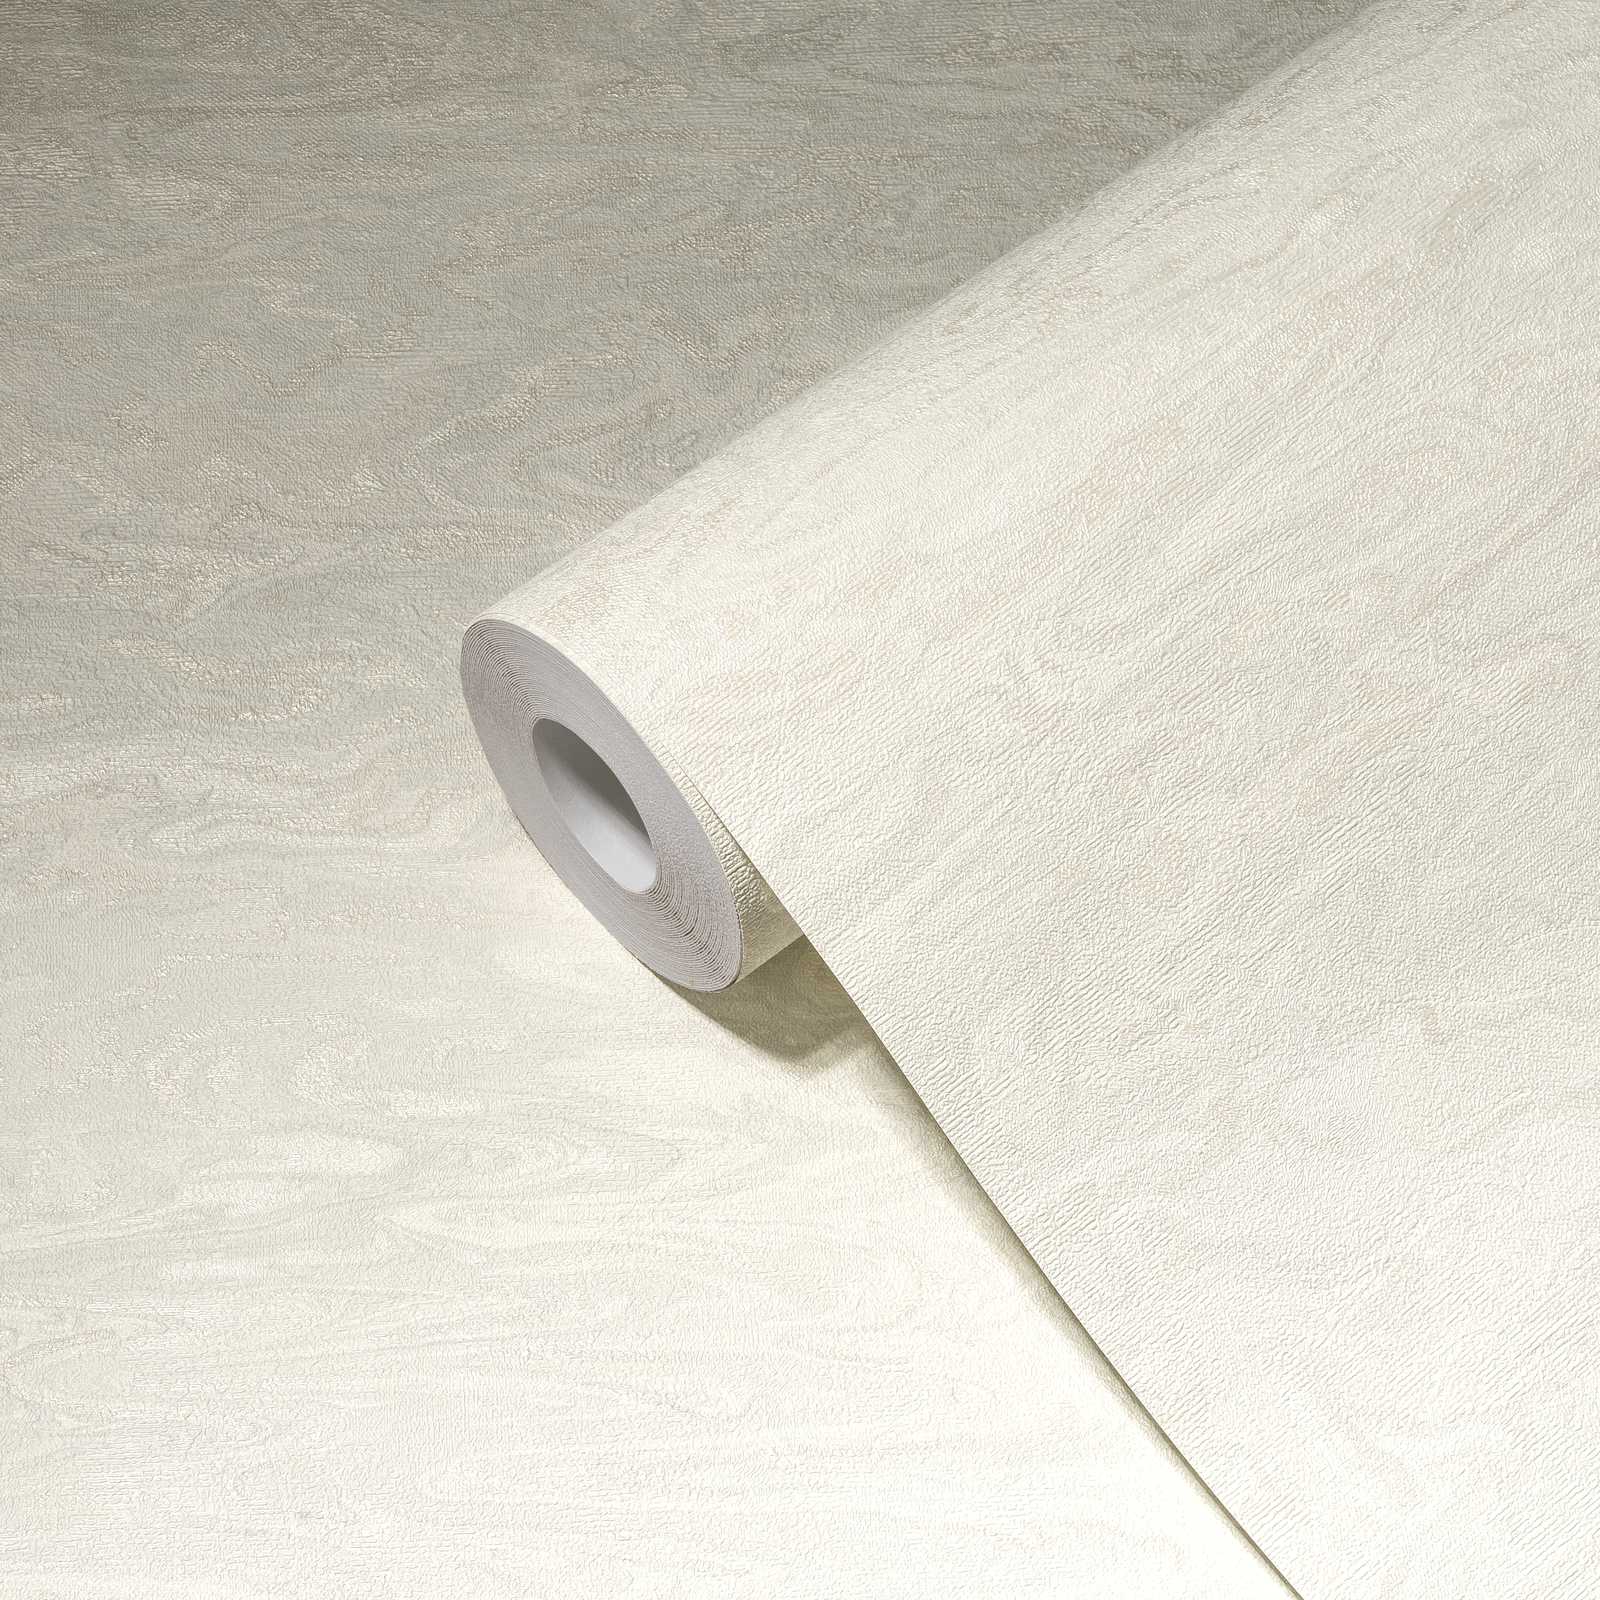             Cream white wallpaper with subtle marbling - white, grey
        